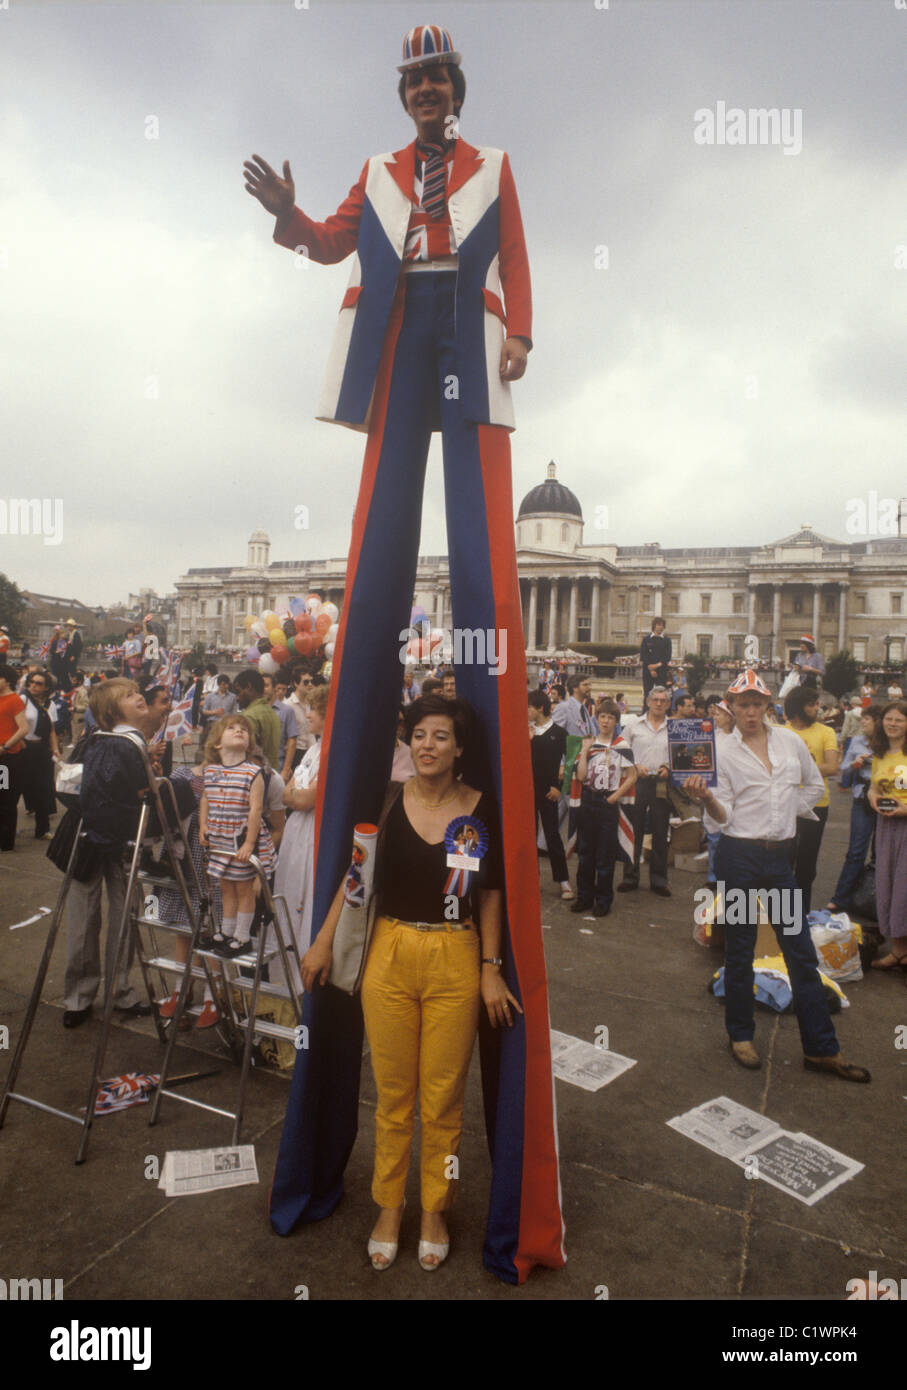 Royal Wedding of Prince Charles ands Lady Diana Spencer Trafalgar Square patriotic man using stilts to see over the crowd. Children on ladders trying hoping to see procession too. July 1981 1980s UK HOMER SYKES Stock Photo